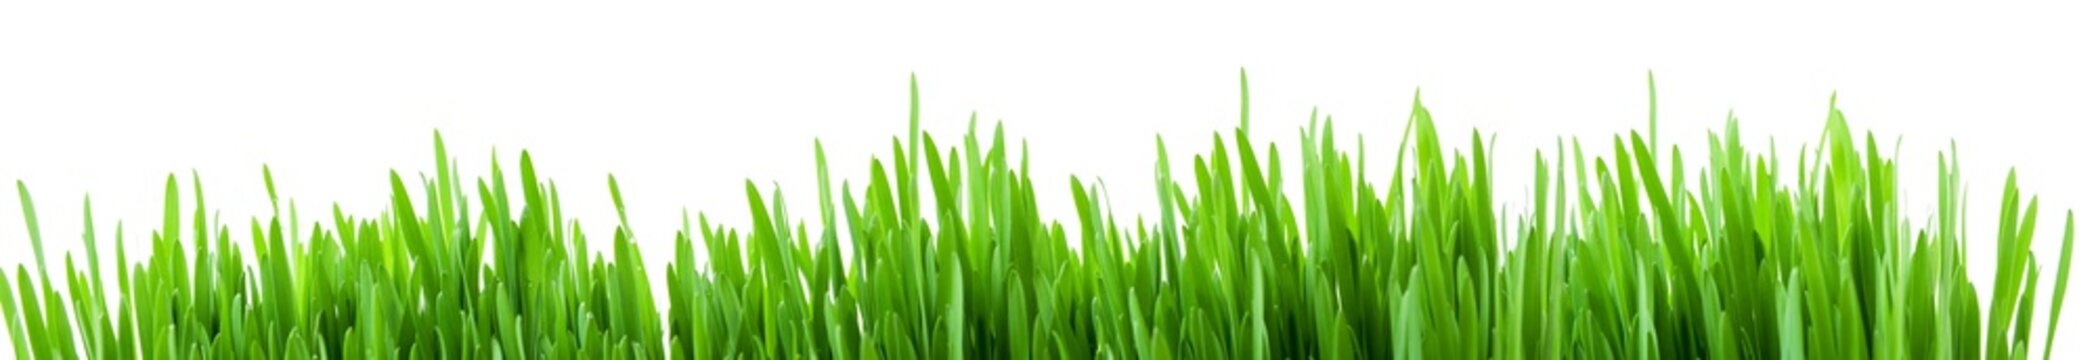 Green spring grass sprouts isolated on white background, wide panorama format for banner